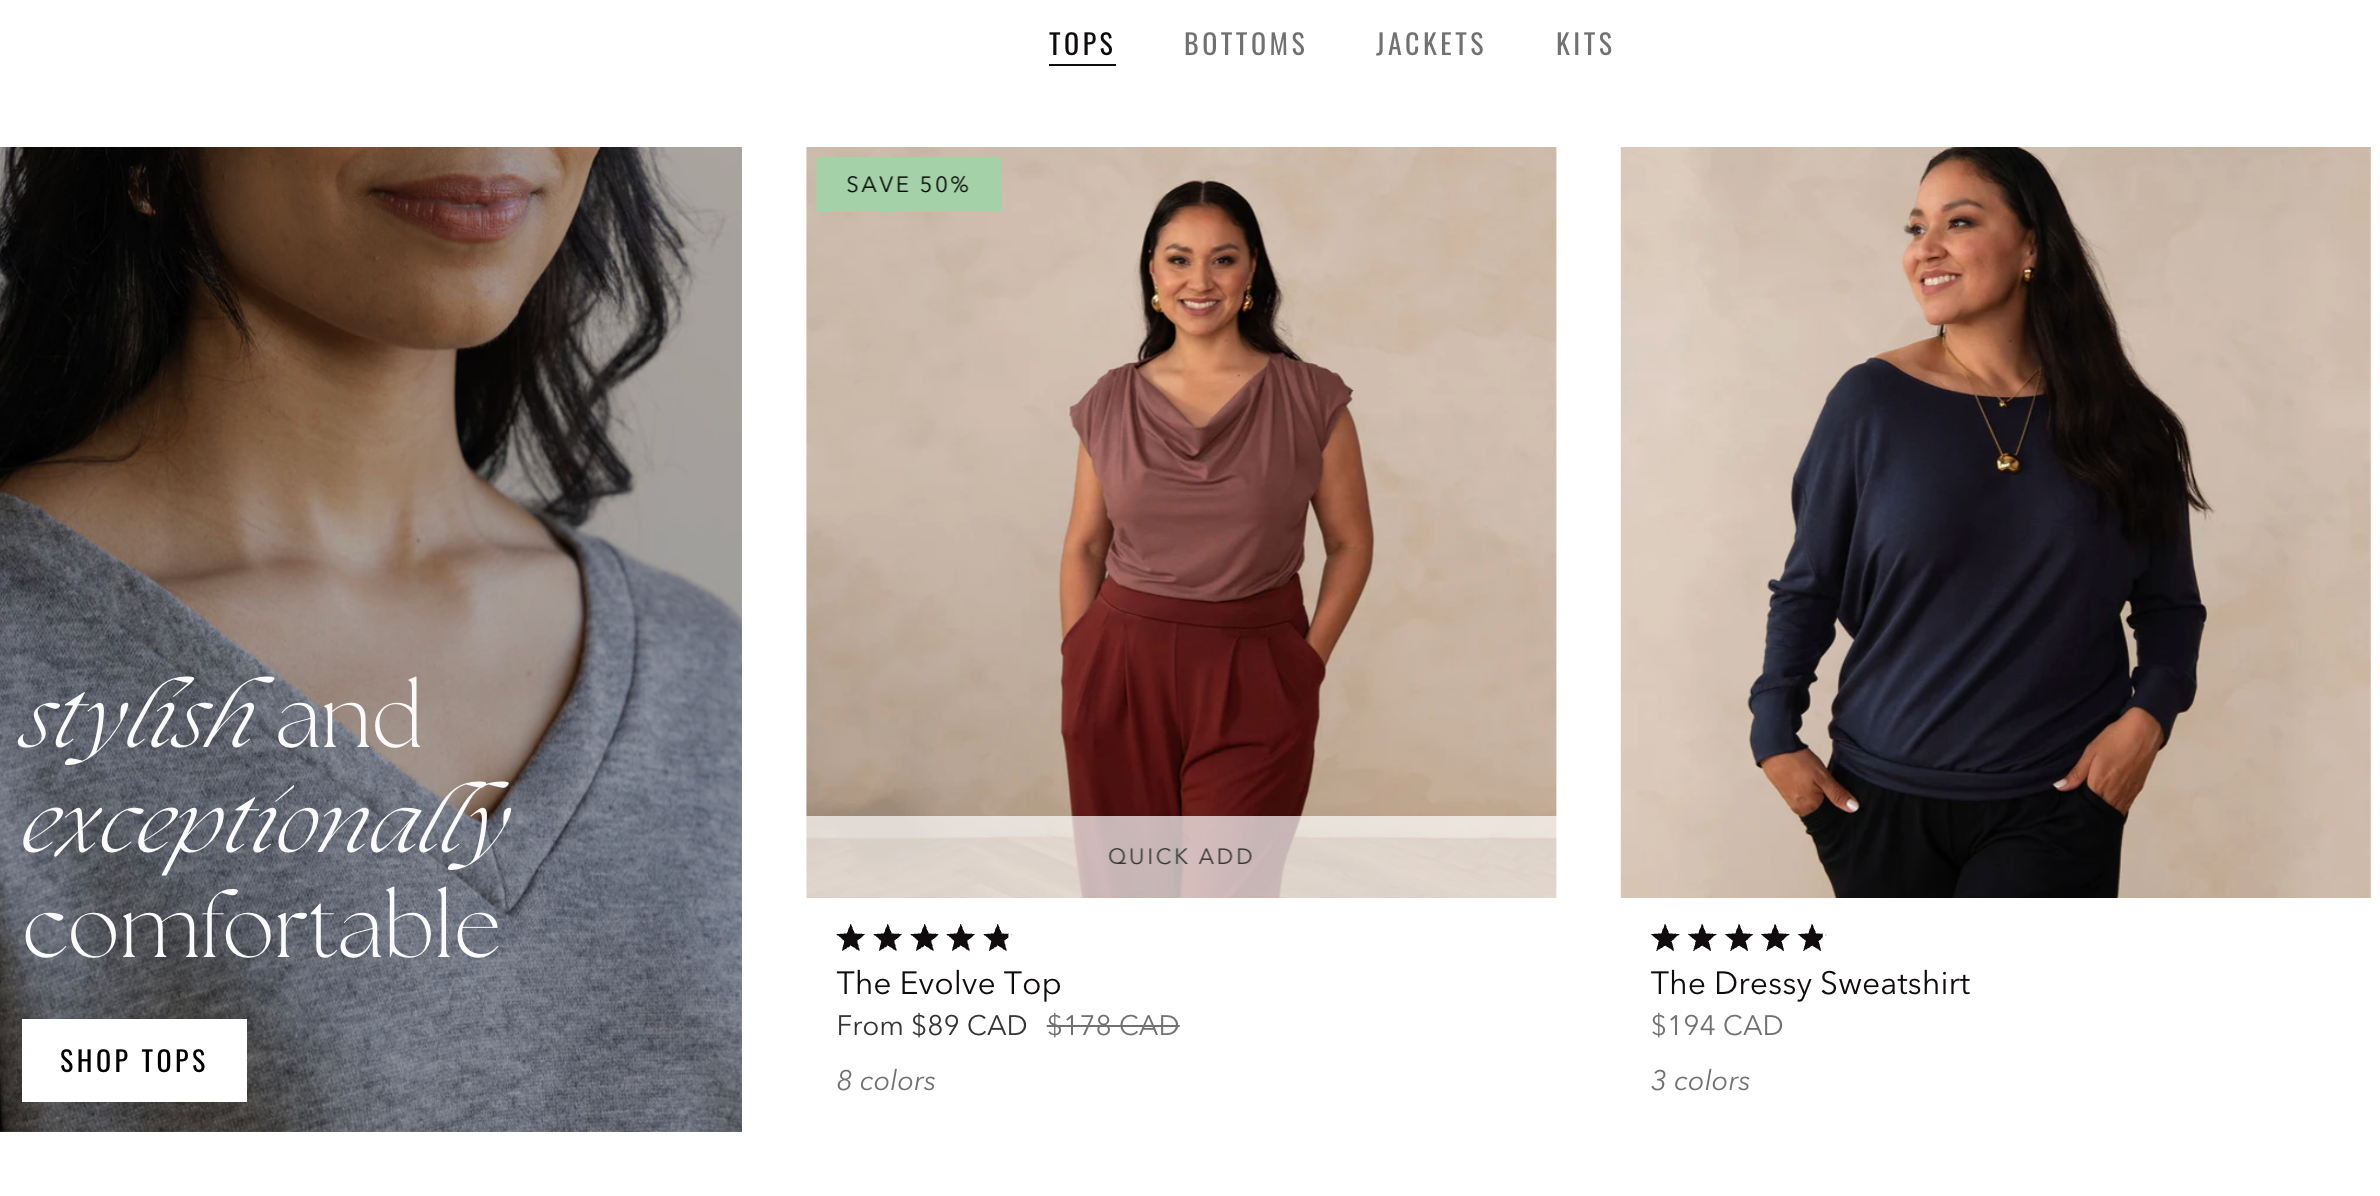 Shopify Turbo themes come with a built-in Quick Shop functionality